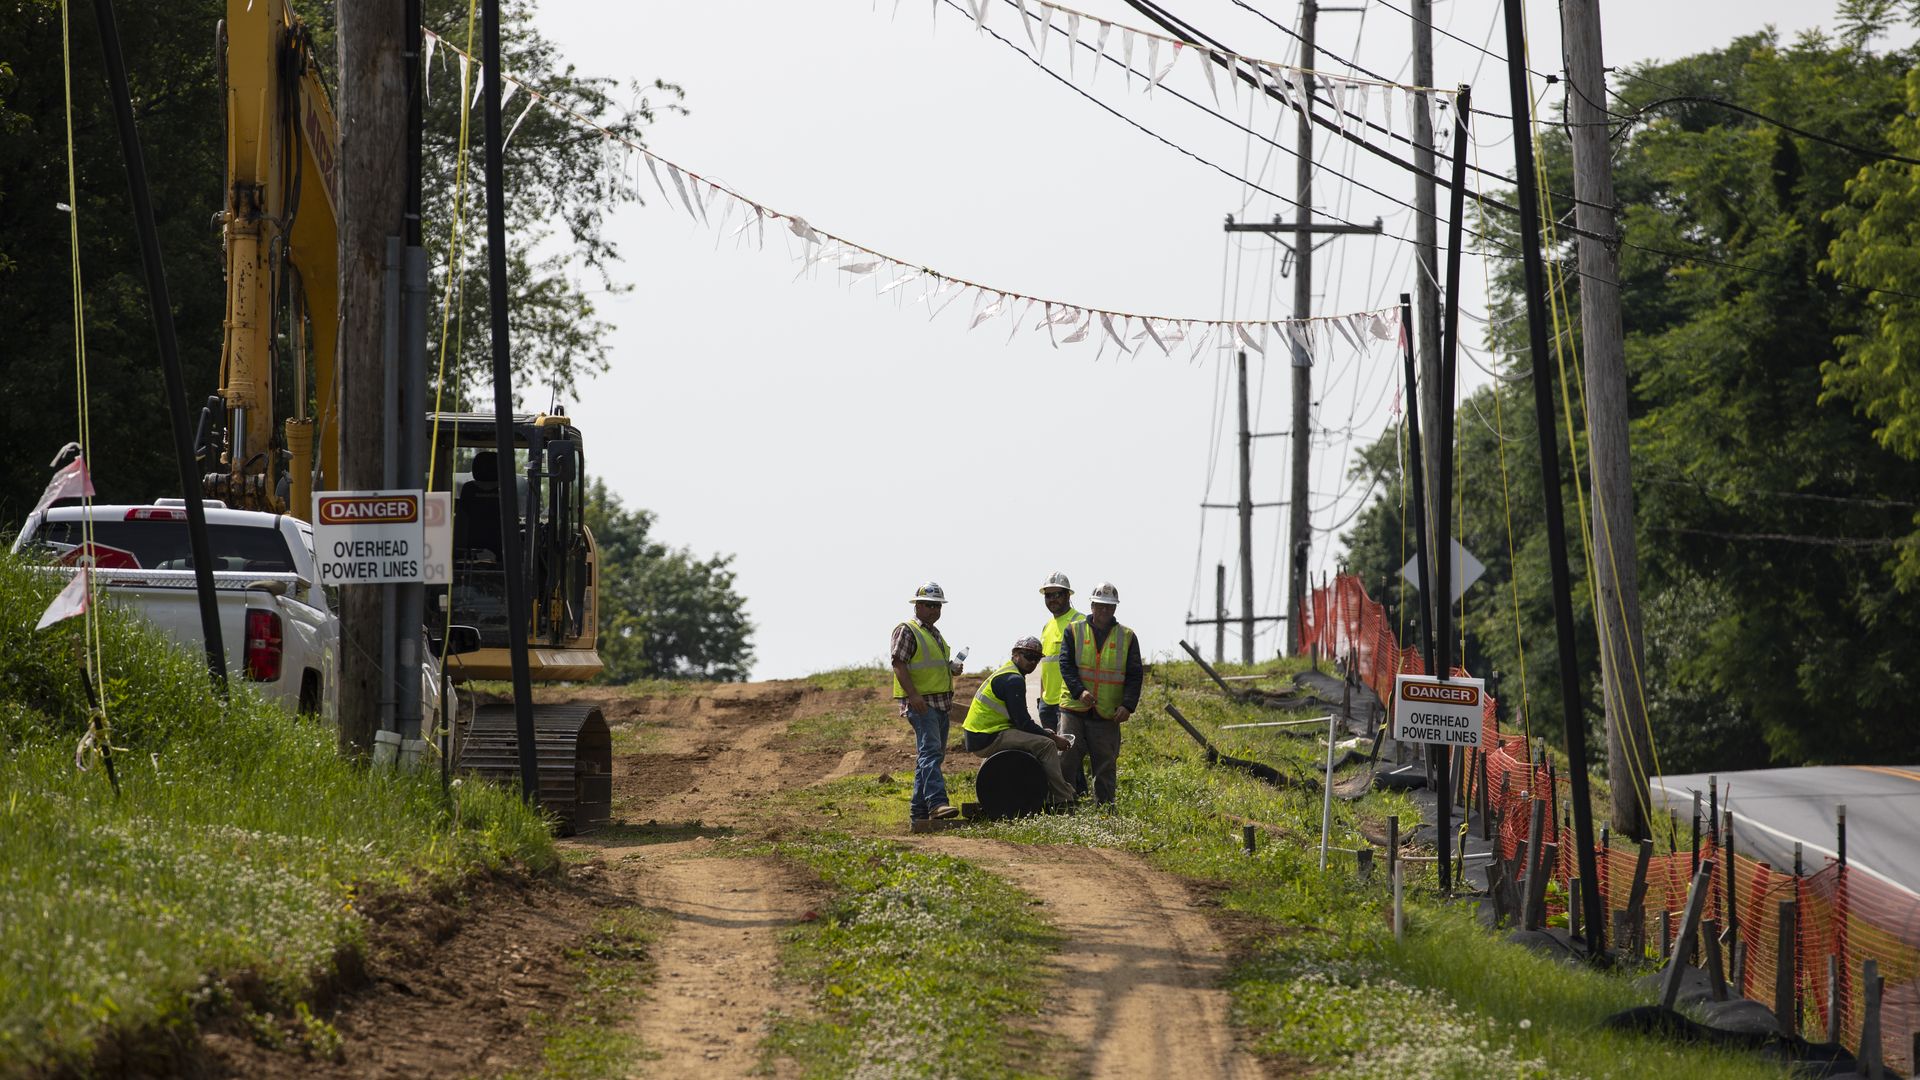 In this image, construction workers stand on a dirt road near a paved road.